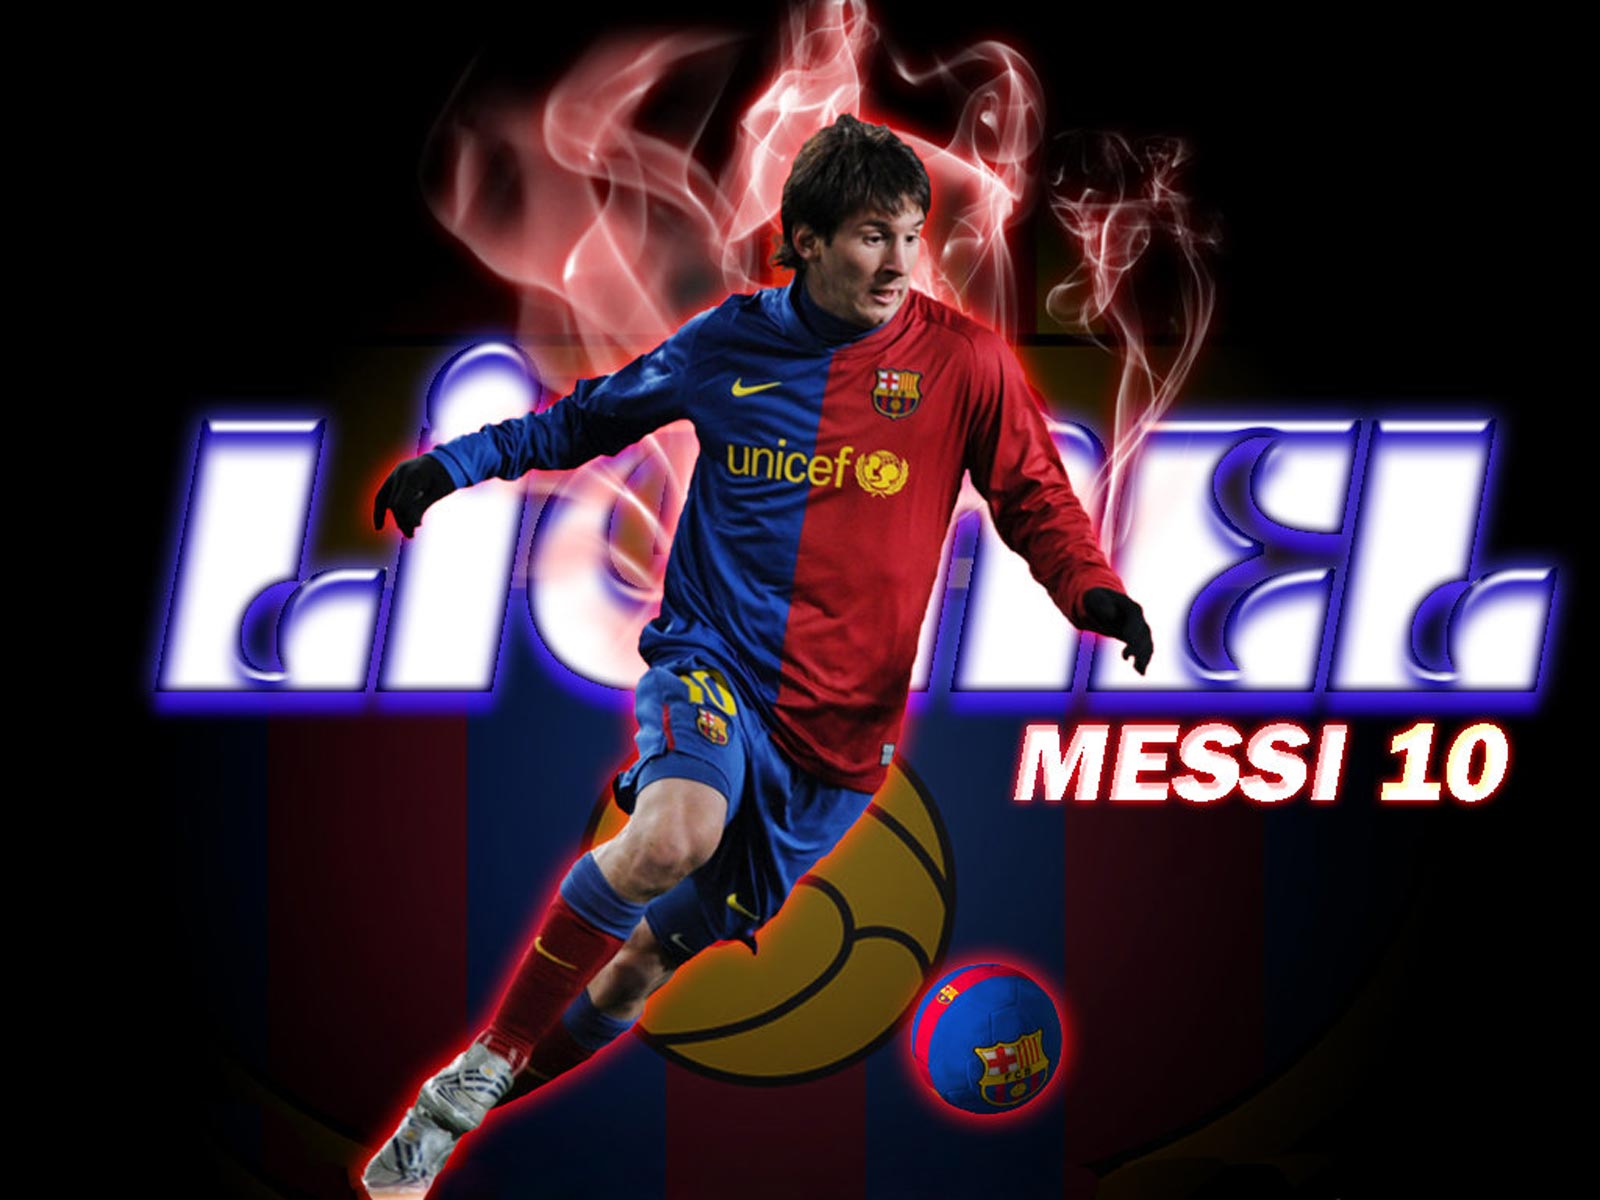 Download Lionel Messi wallpapers soccer wallpaper from the above